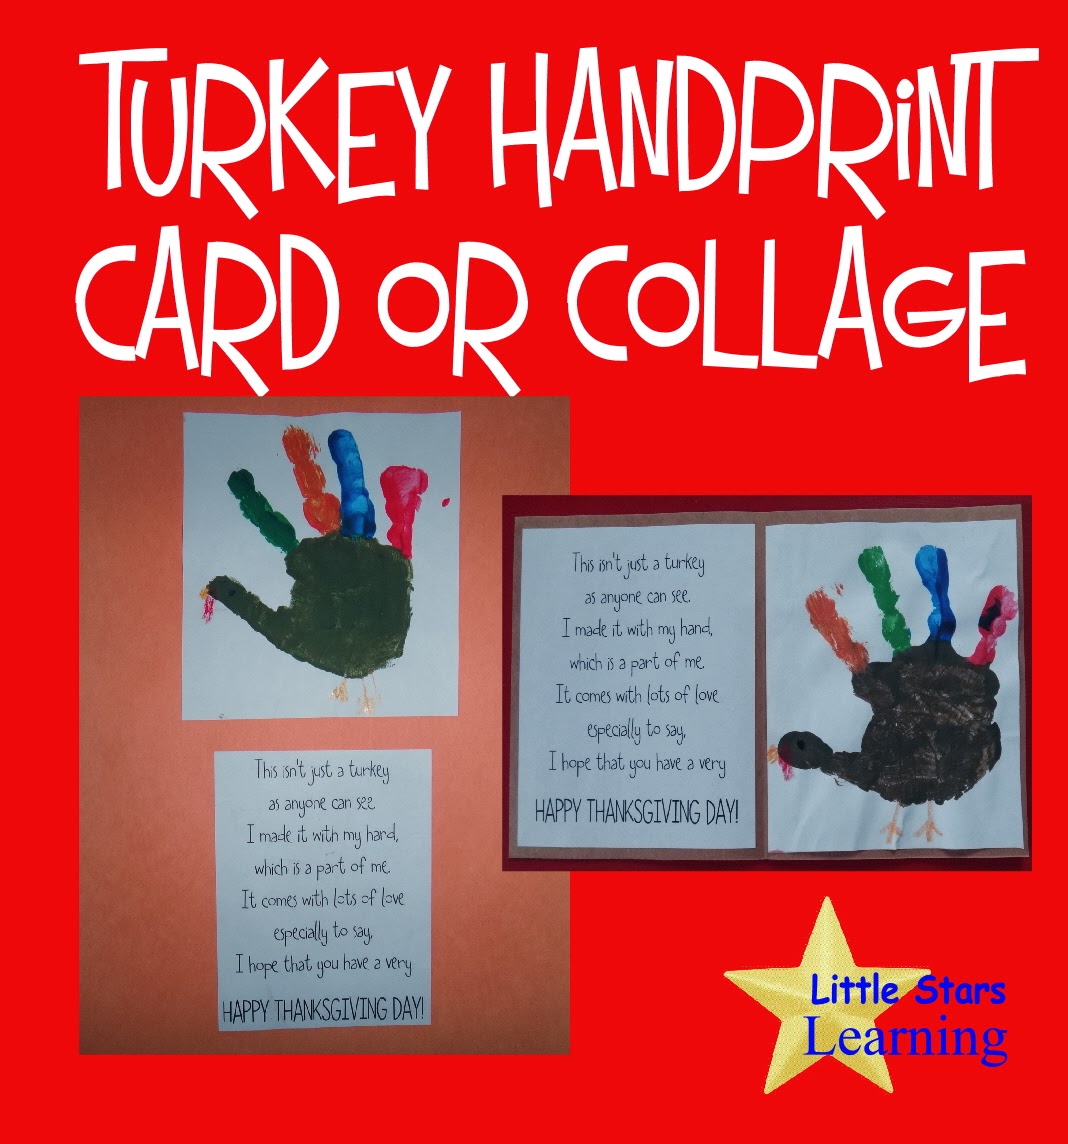 little-stars-learning-turkey-handprint-cards-with-free-poetry-printable